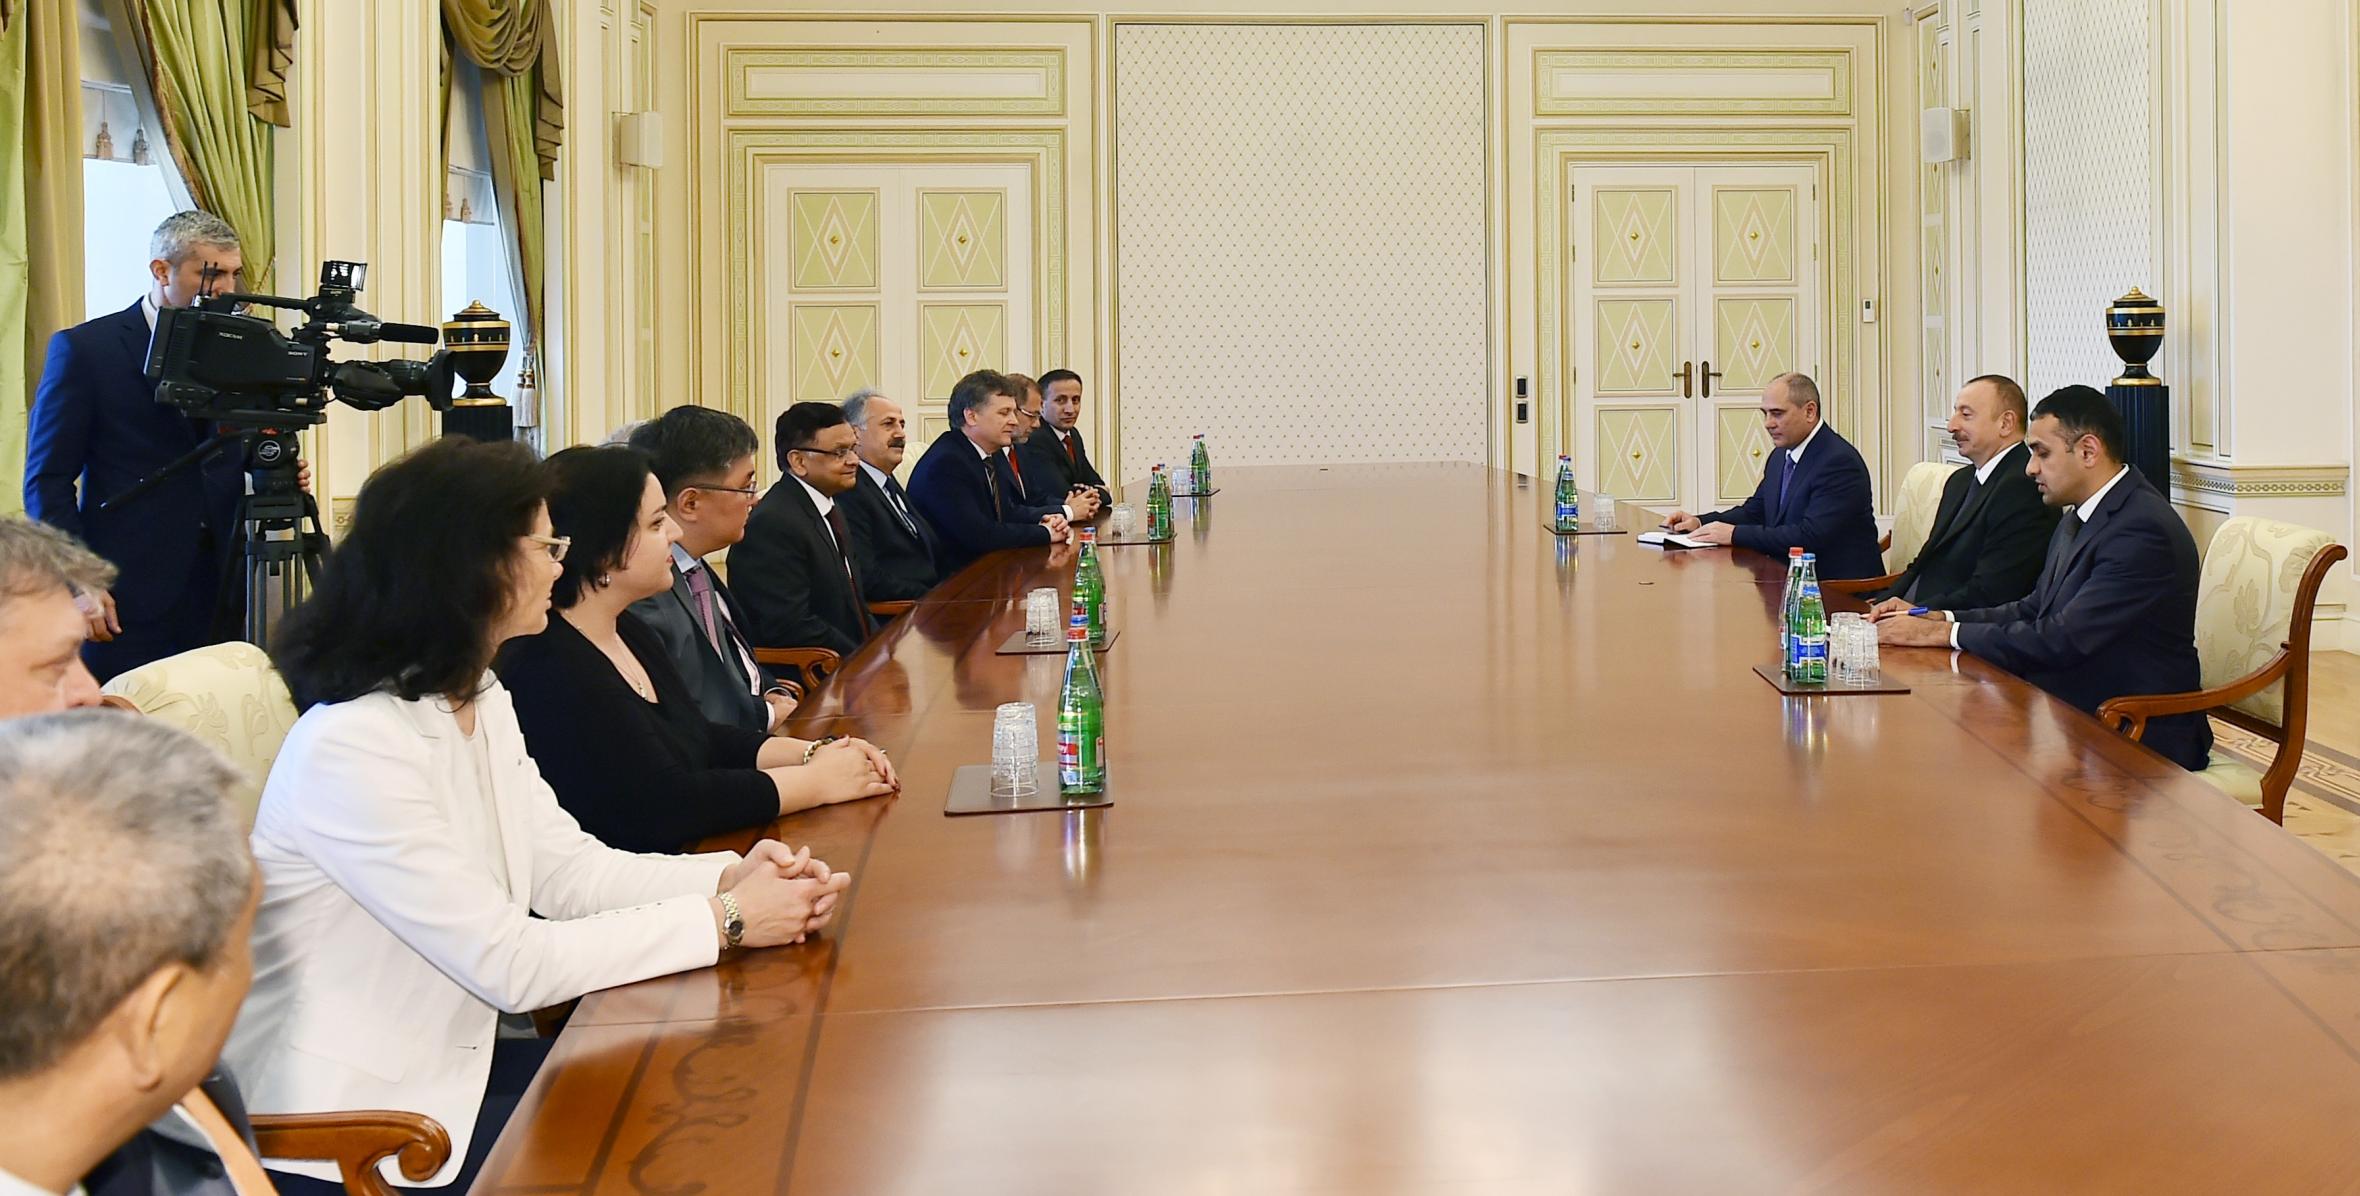 Ilham Aliyev received group of participants of Subregional Workshop for Statisticians and meeting of Council of Heads of CIS Statistical Services